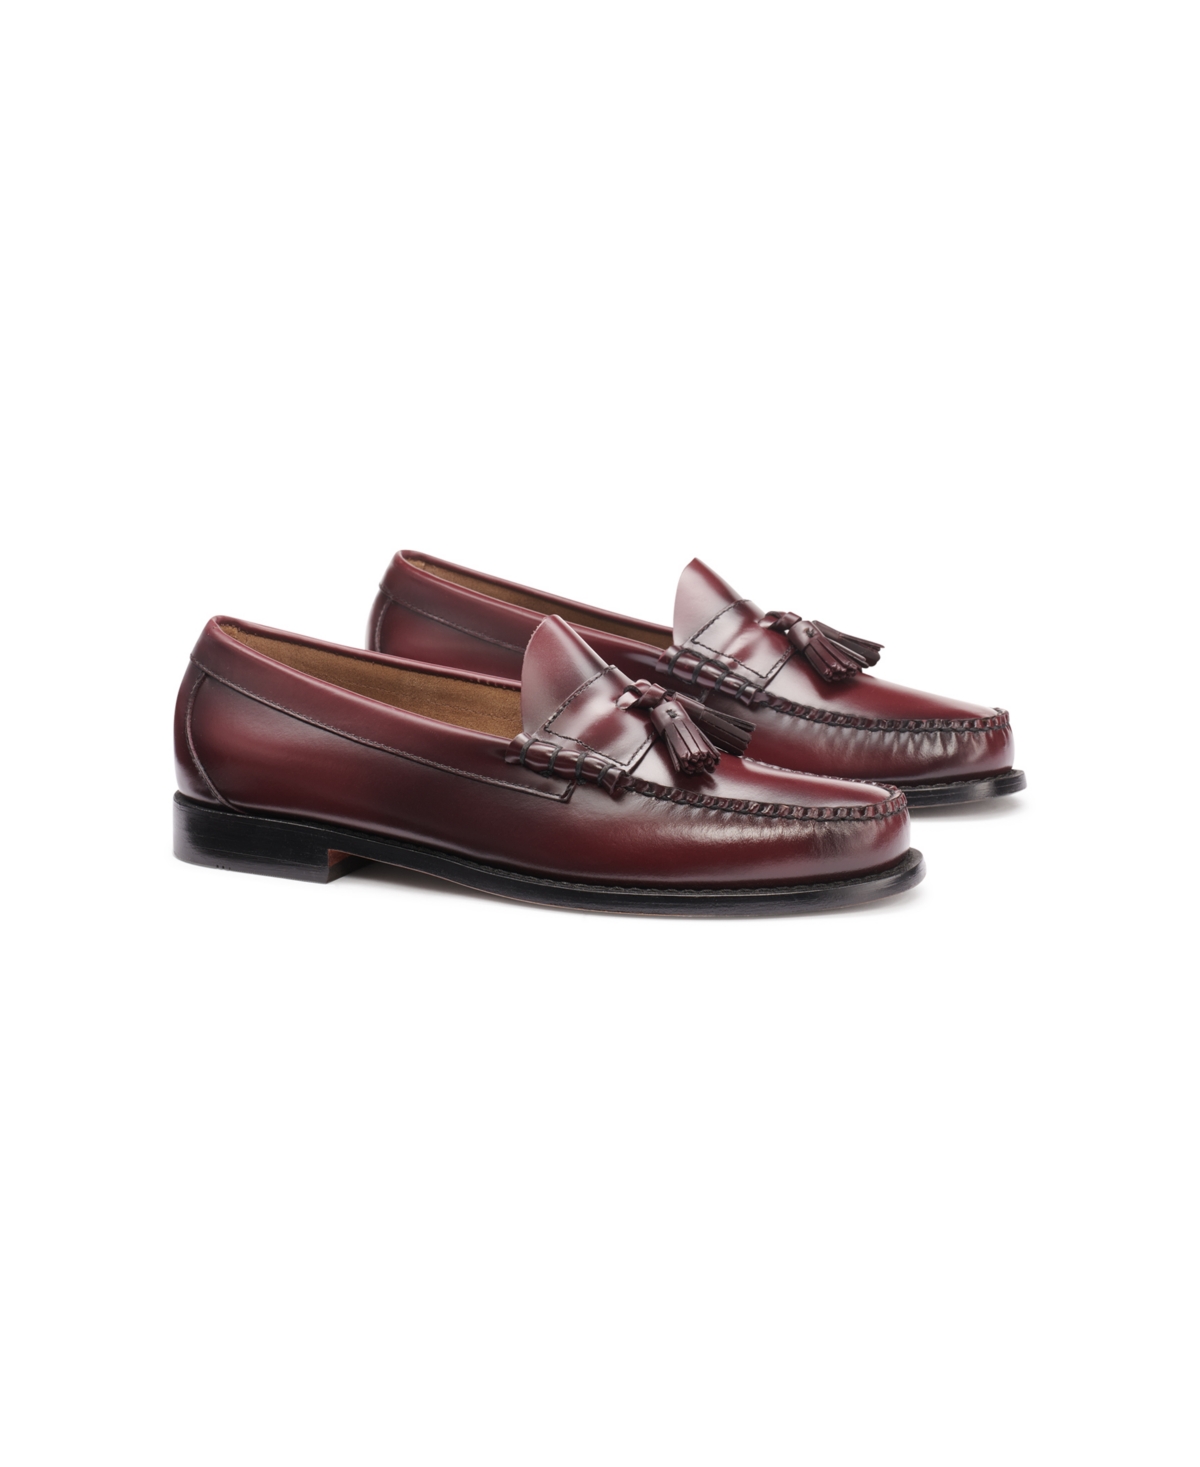 Gh Bass G.h.bass Men's Lennox Tassel Weejuns Comfort Loafers In Wine